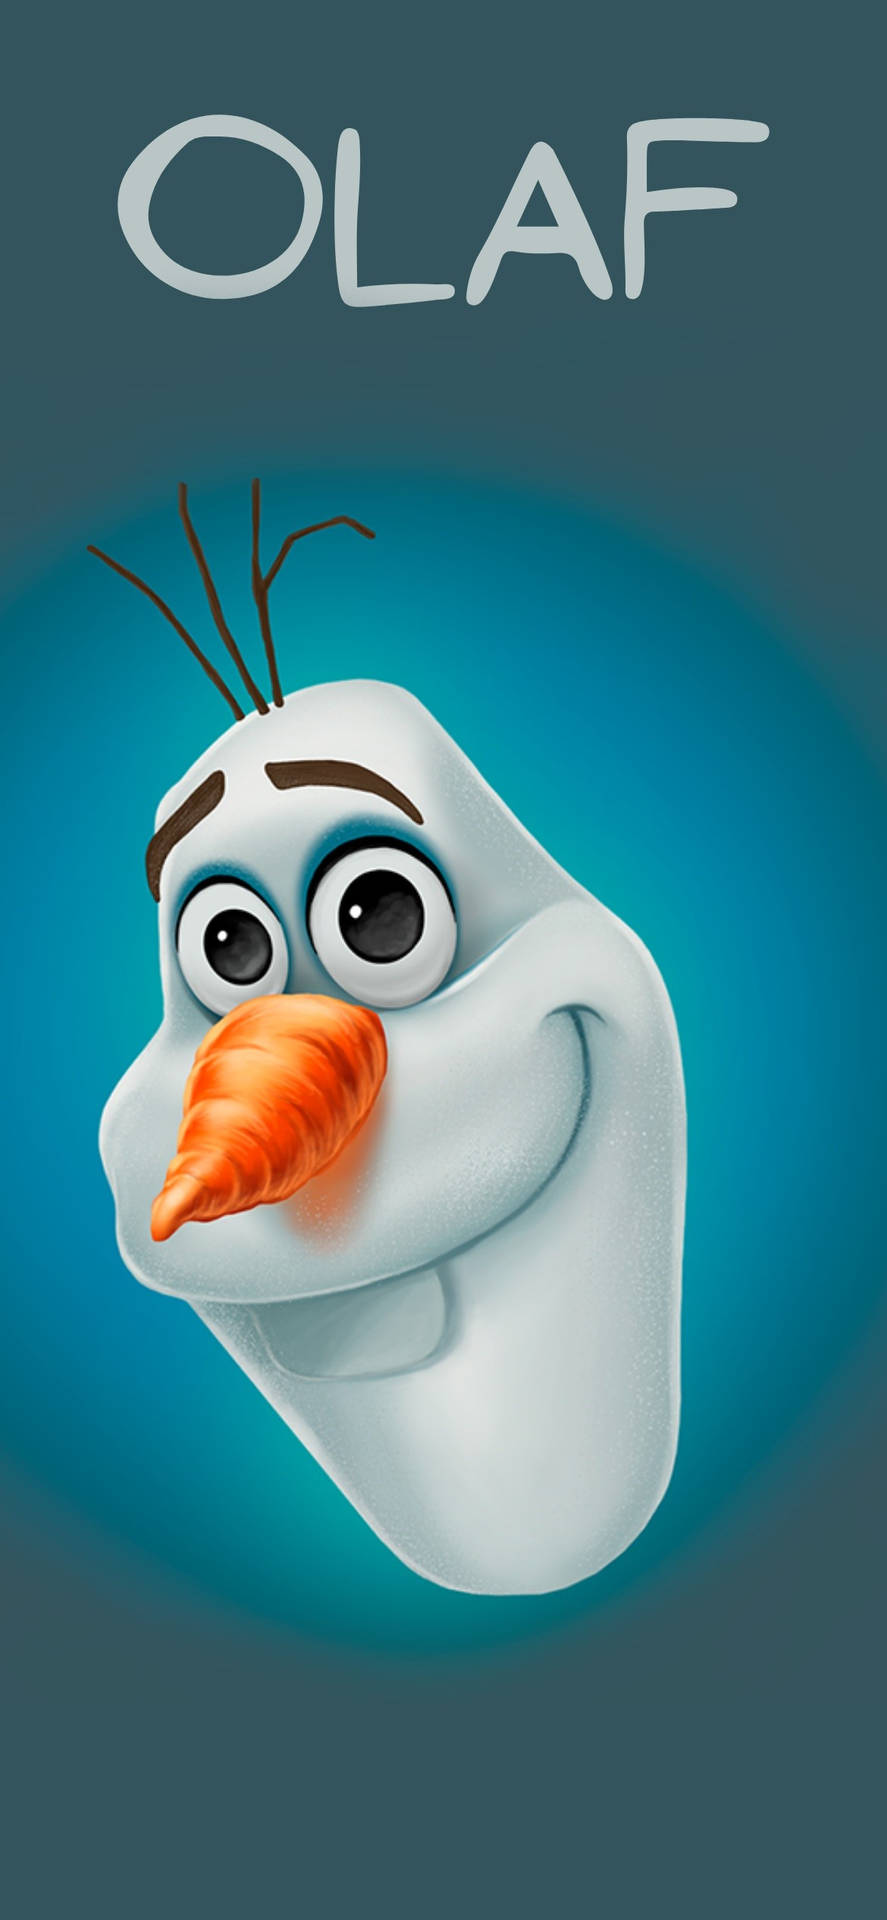 olaf frozen drawing tumblr